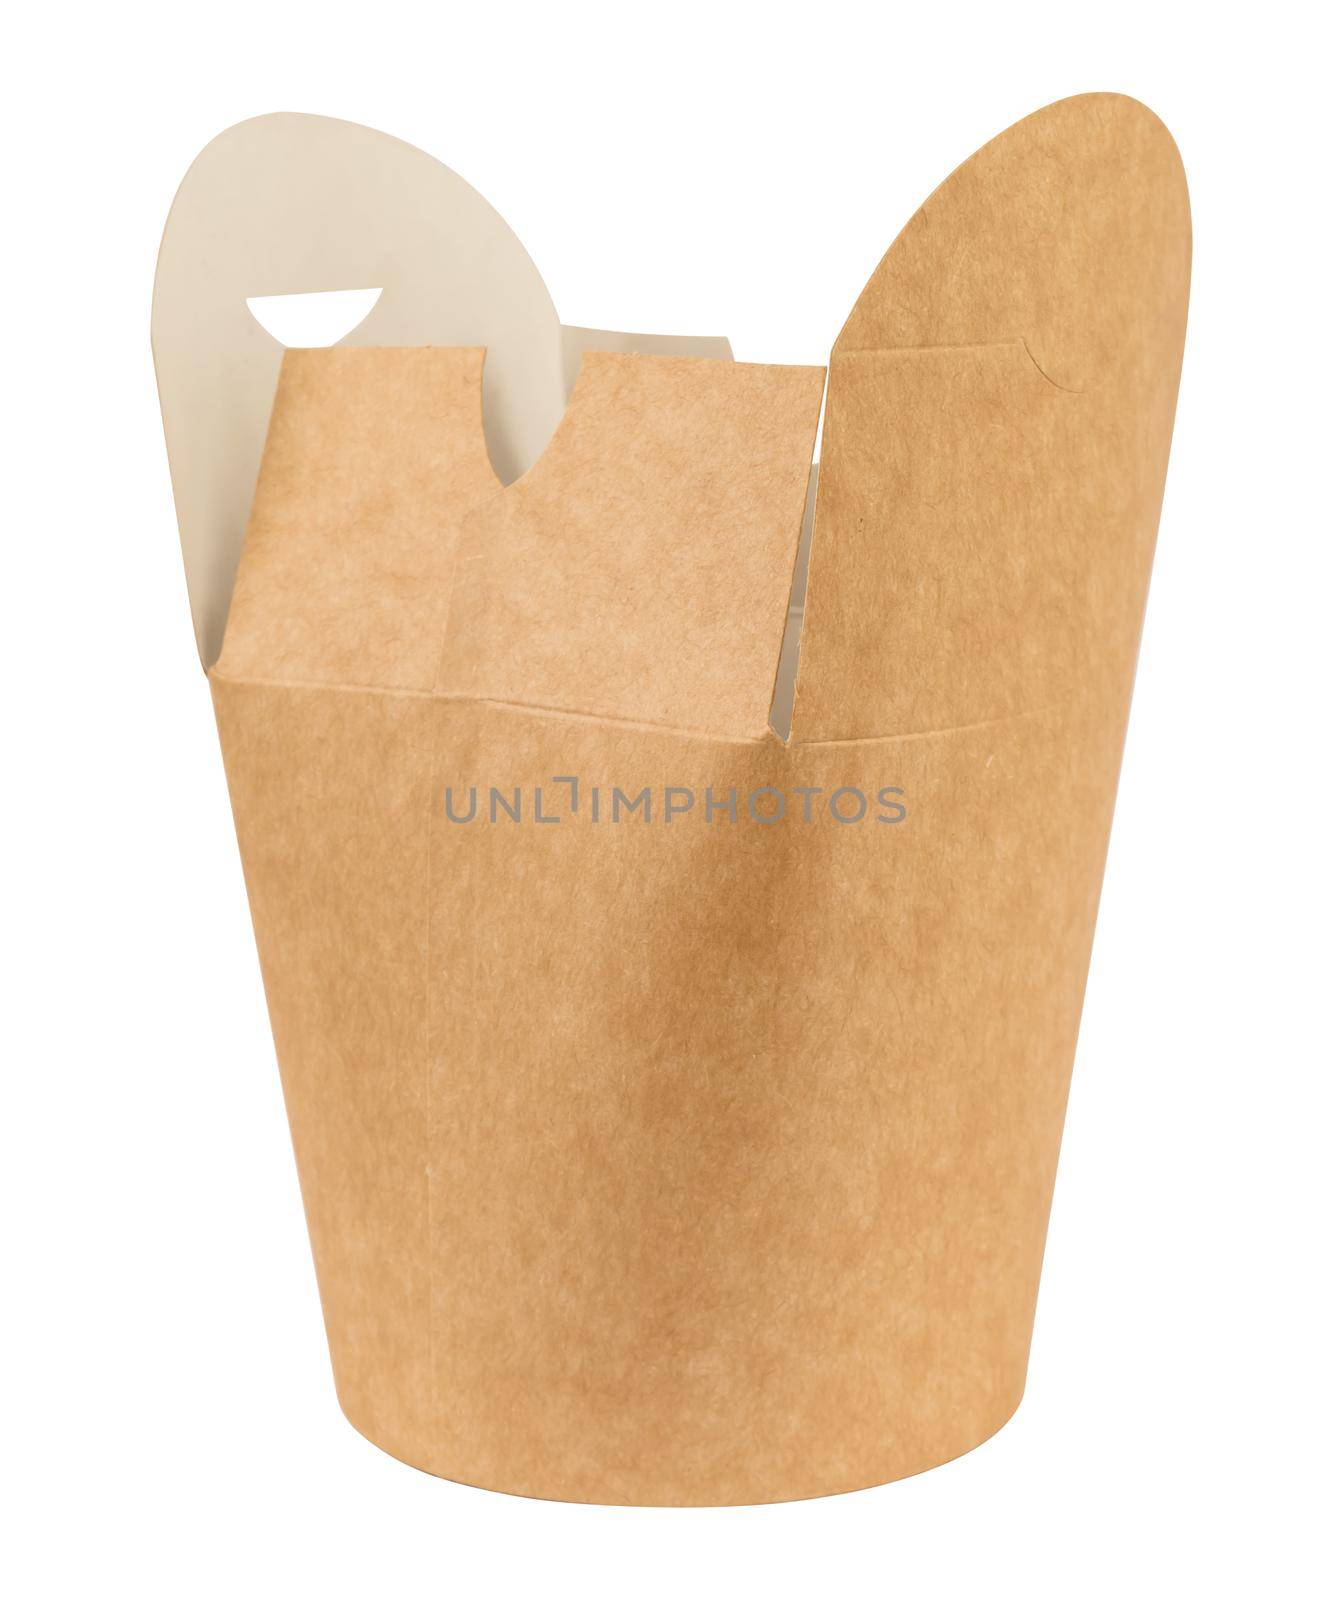 disposable paper packaging, for food, on a white background in isolation